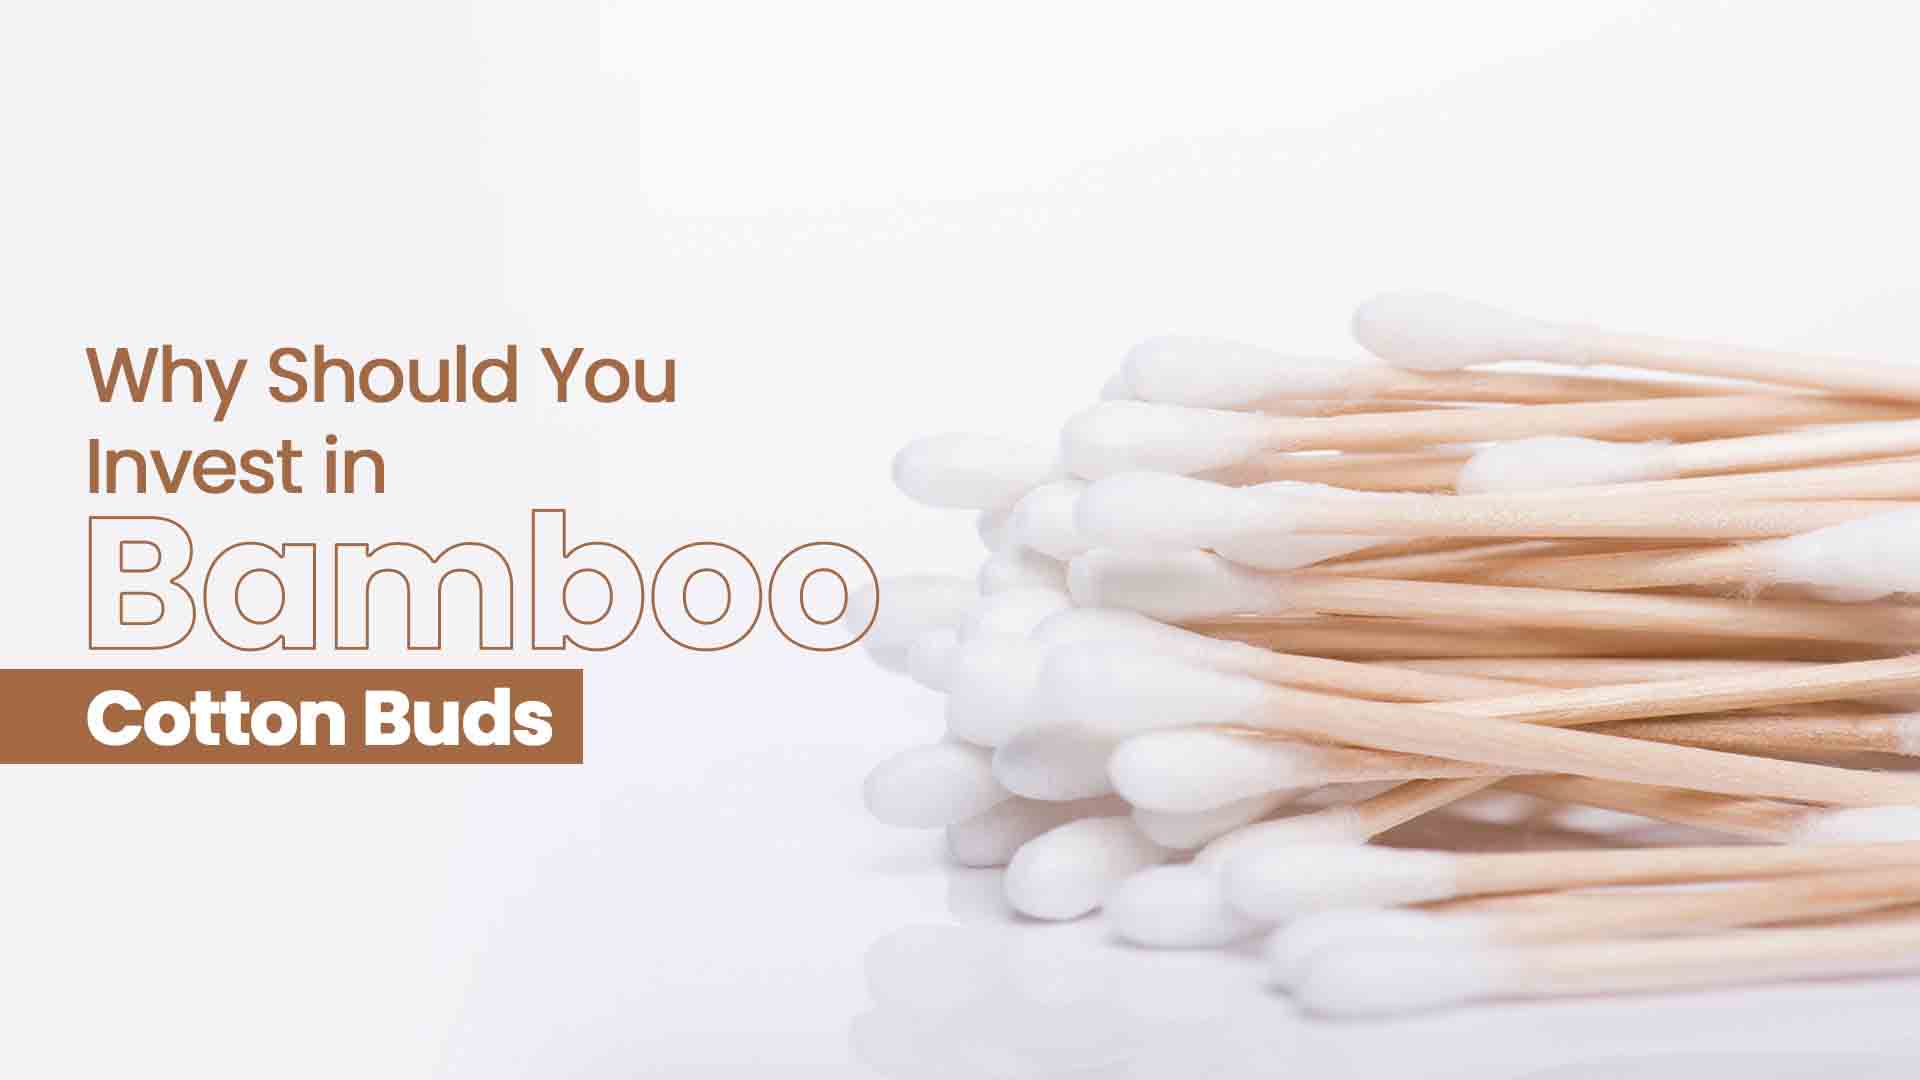 Why Should You Invest in Bamboo Cotton Buds?